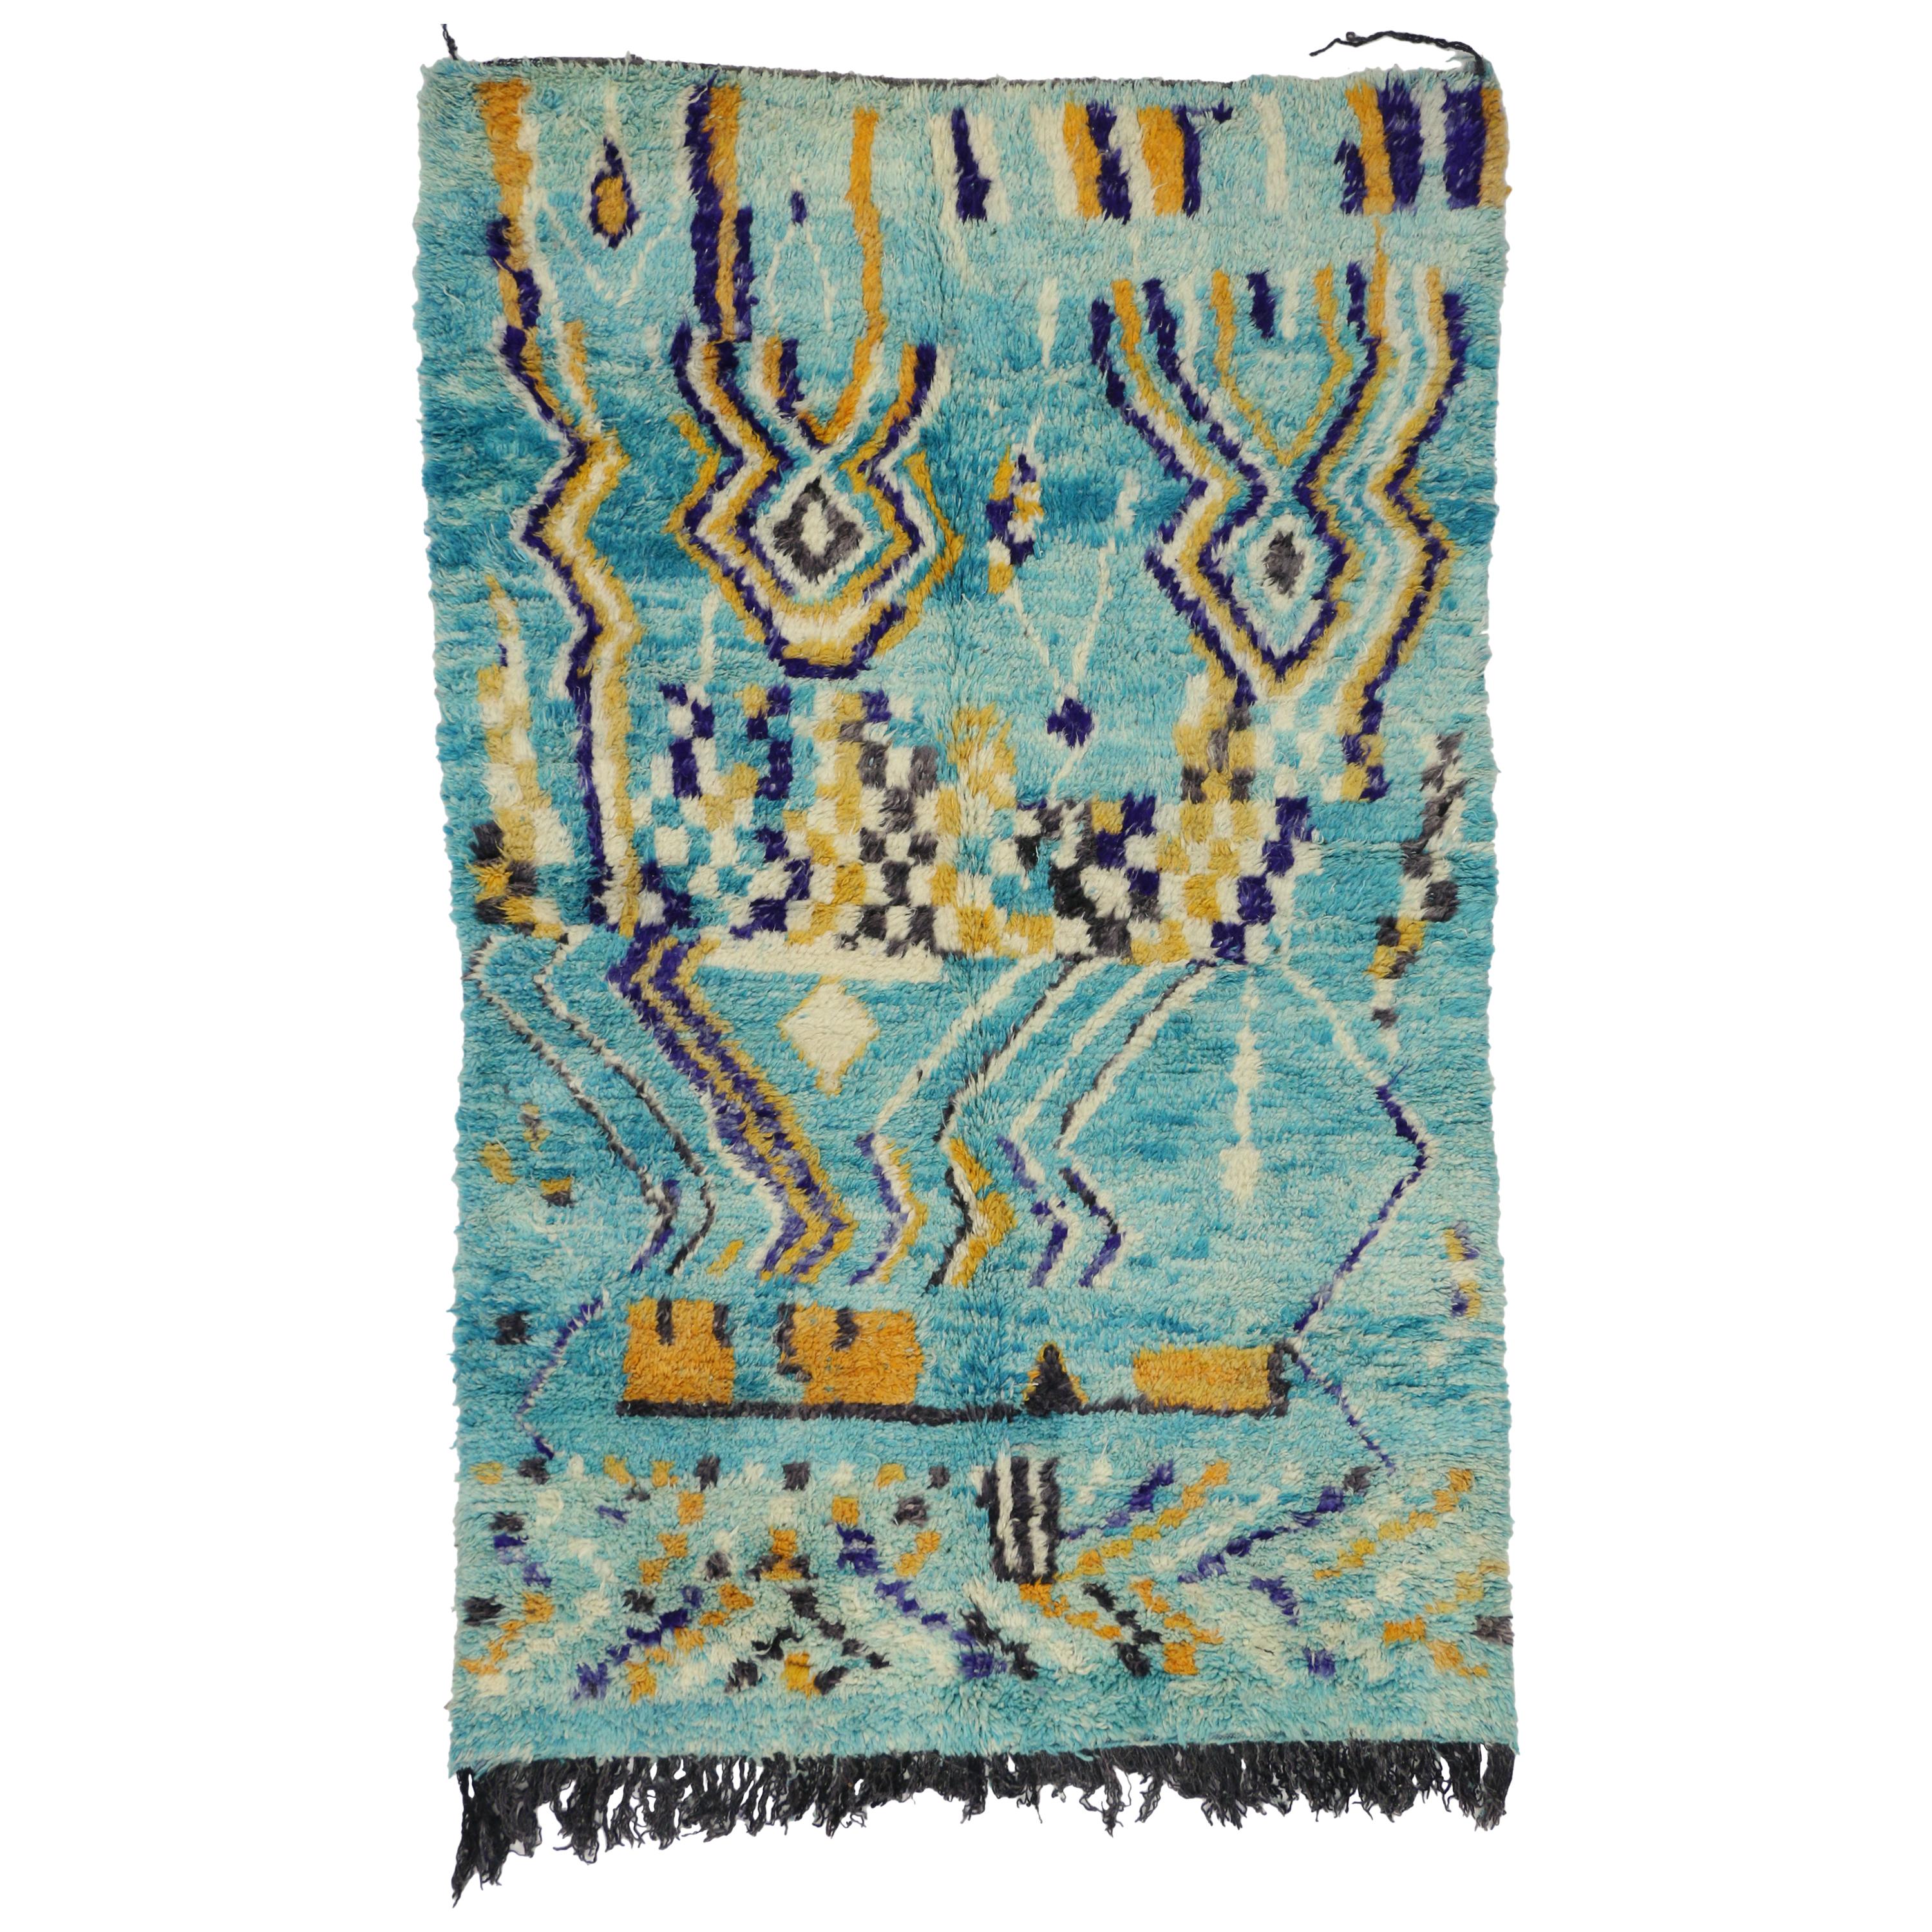 Contemporary Abstract Moroccan Rug with Post-Modern Memphis-Bauhaus Style